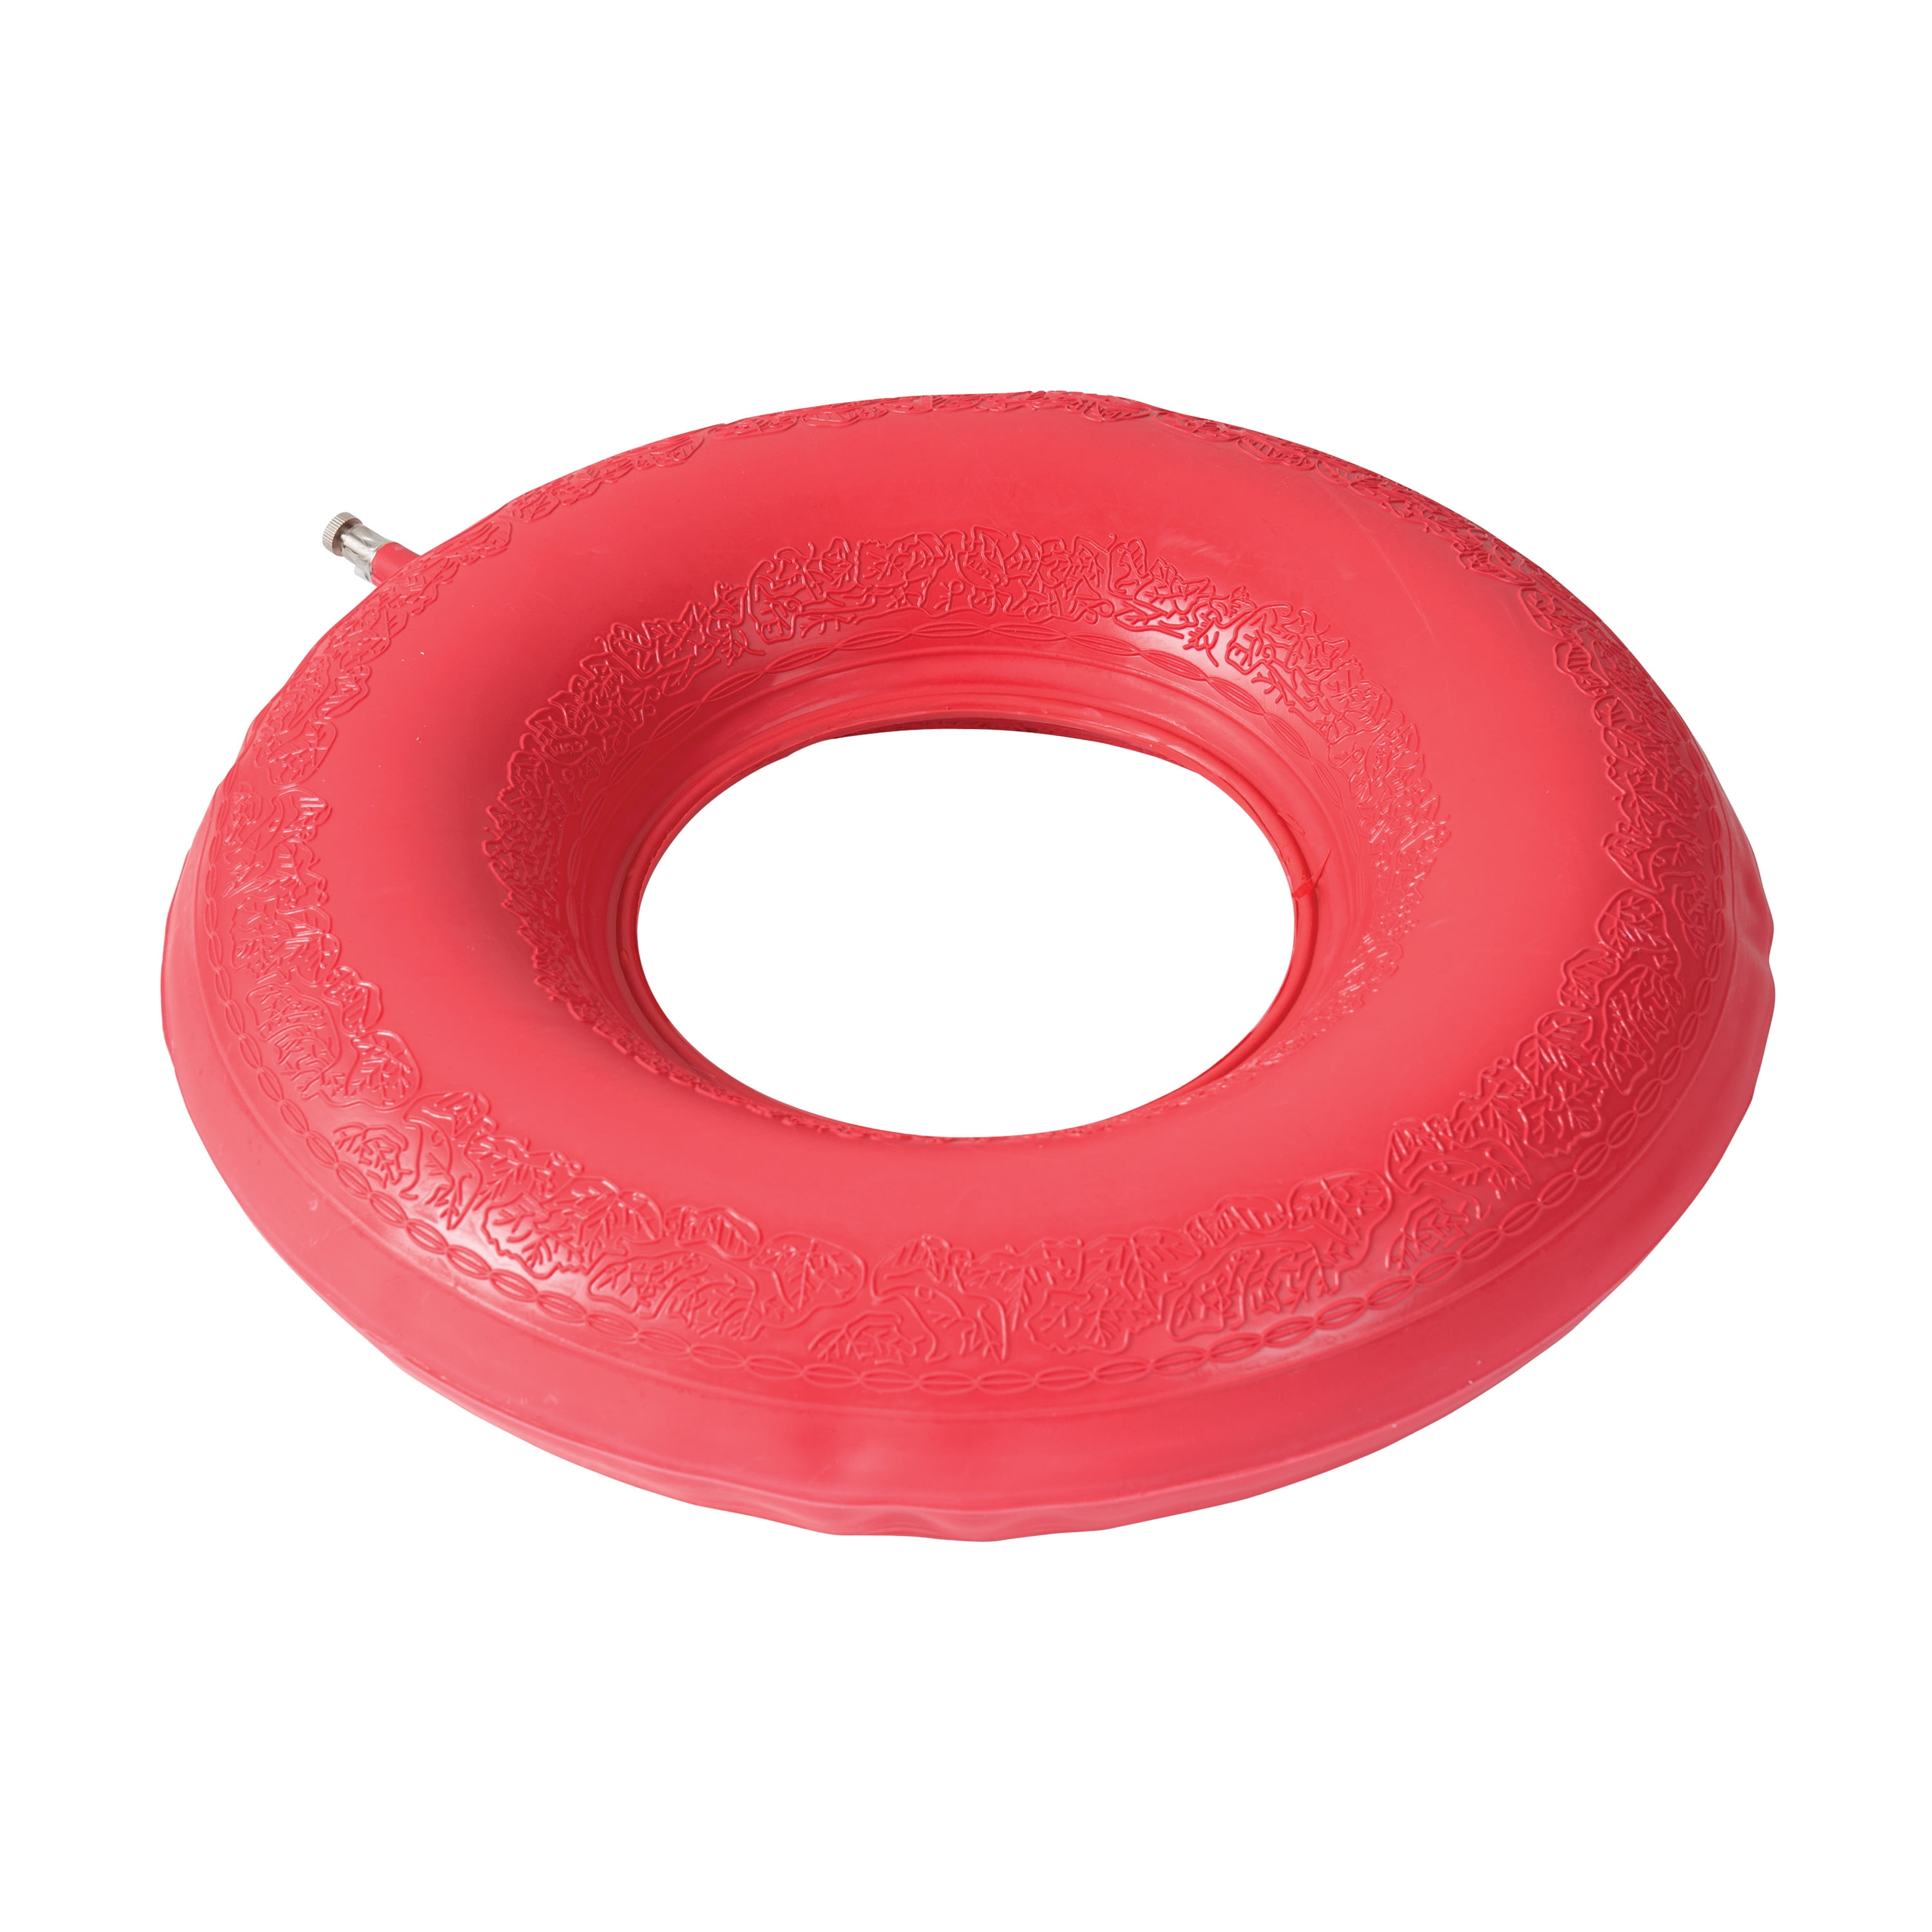 Inflatable Ring Donut Seat Cushion Pillow with Air Pump for Hemorrhoid  Pregnancy 